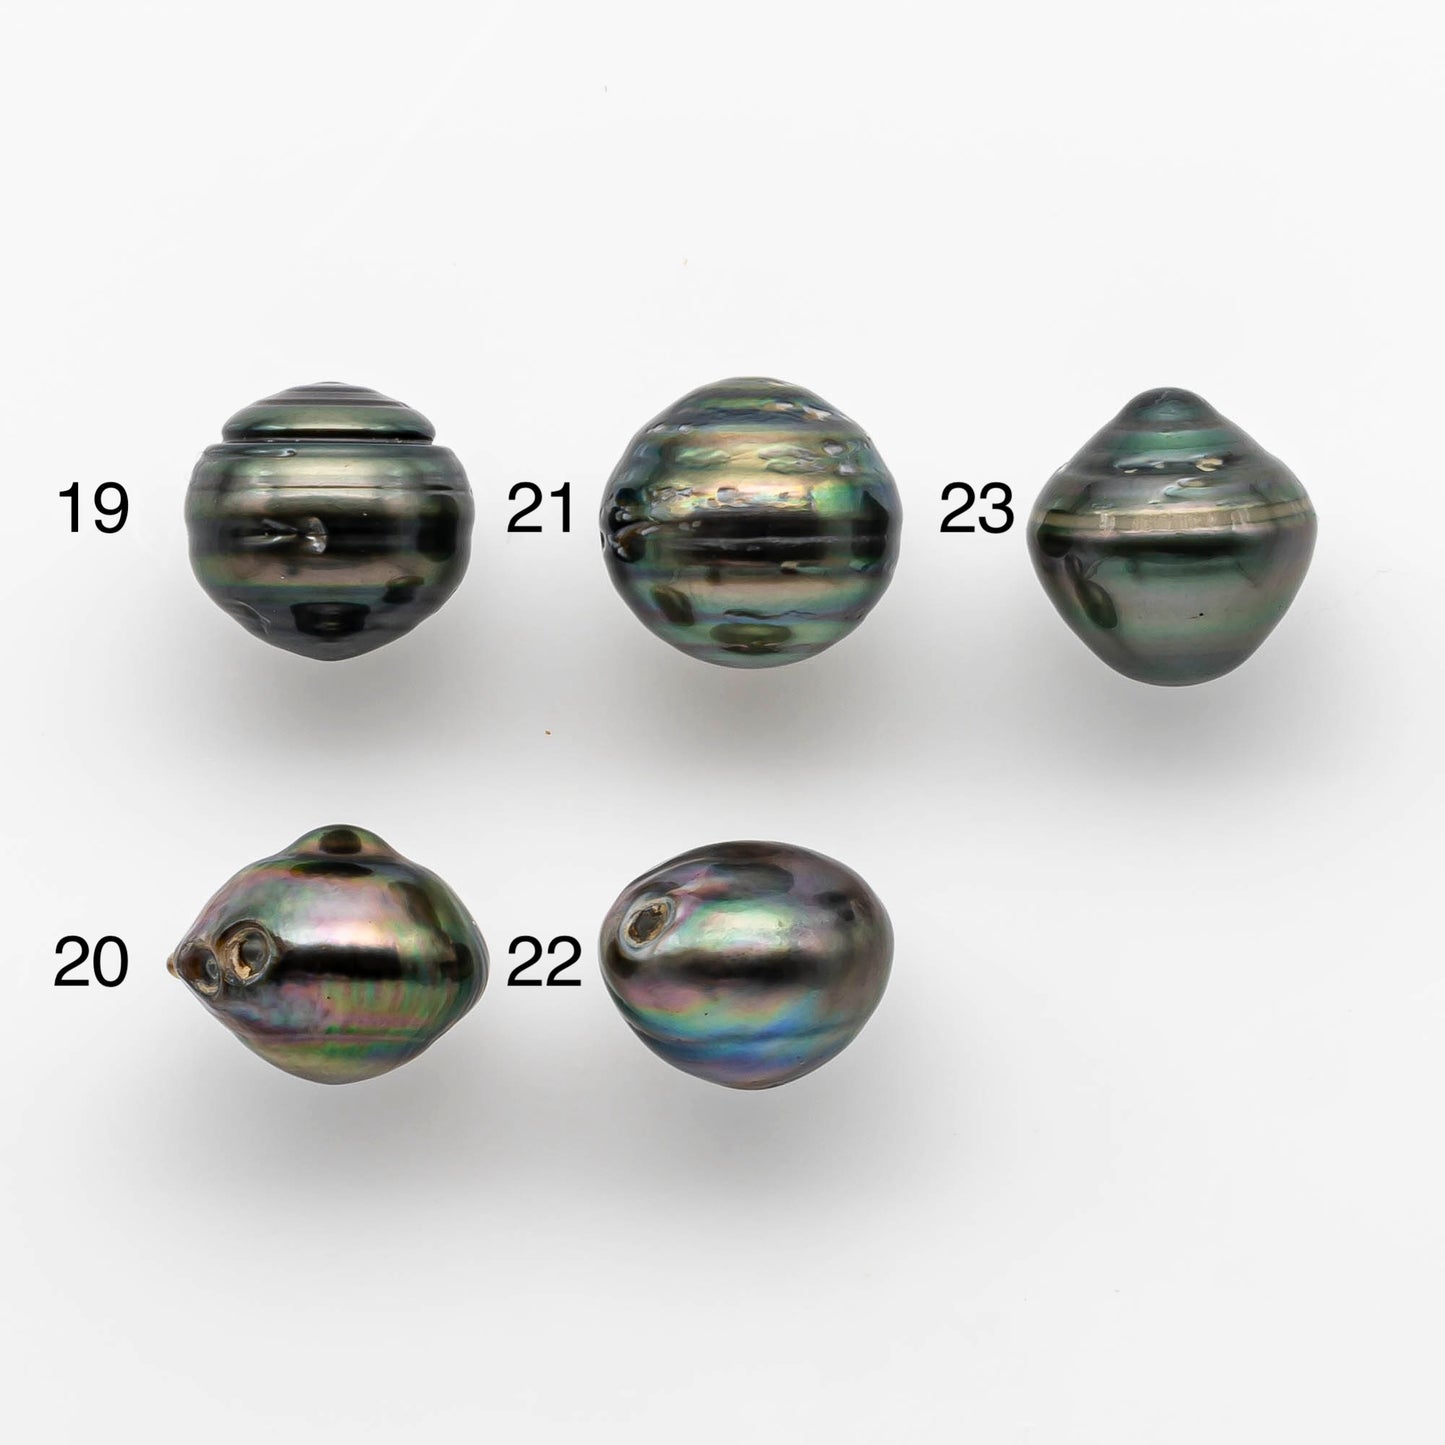 14-15mm Tahitian Pearl Baroque Drops in Natural Color and High Luster, Undrilled Loose Single Piece, SKU # 1892TH